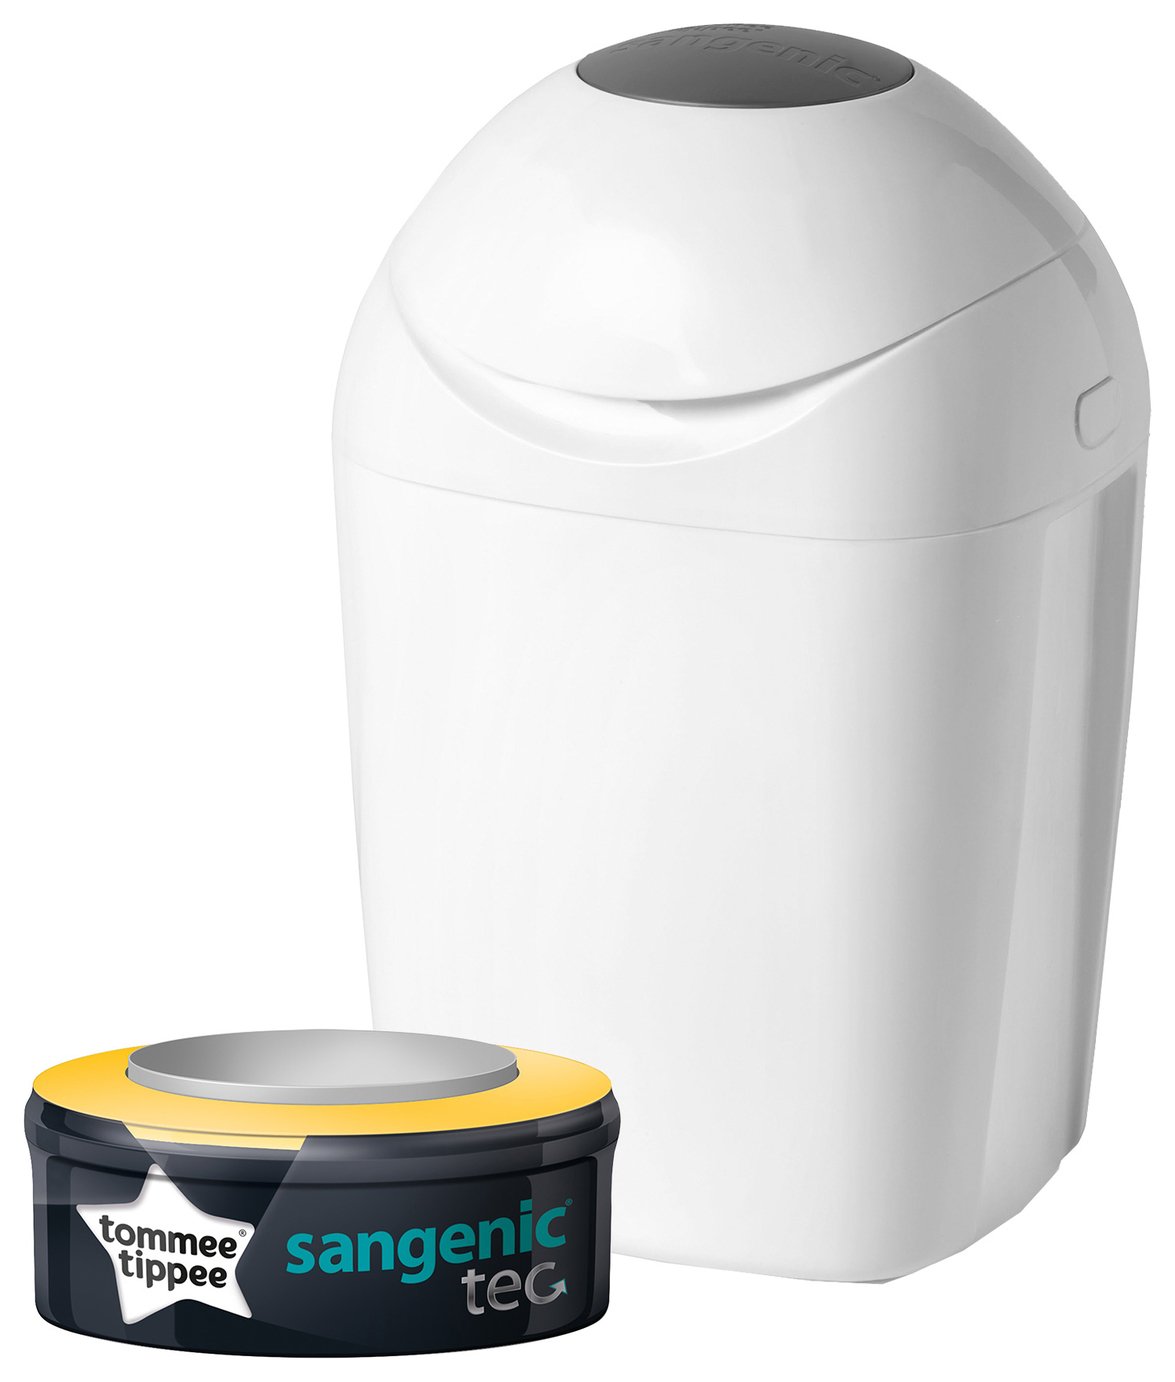 Tommee Tippee Sangenic Tec Nappy Disposal System,